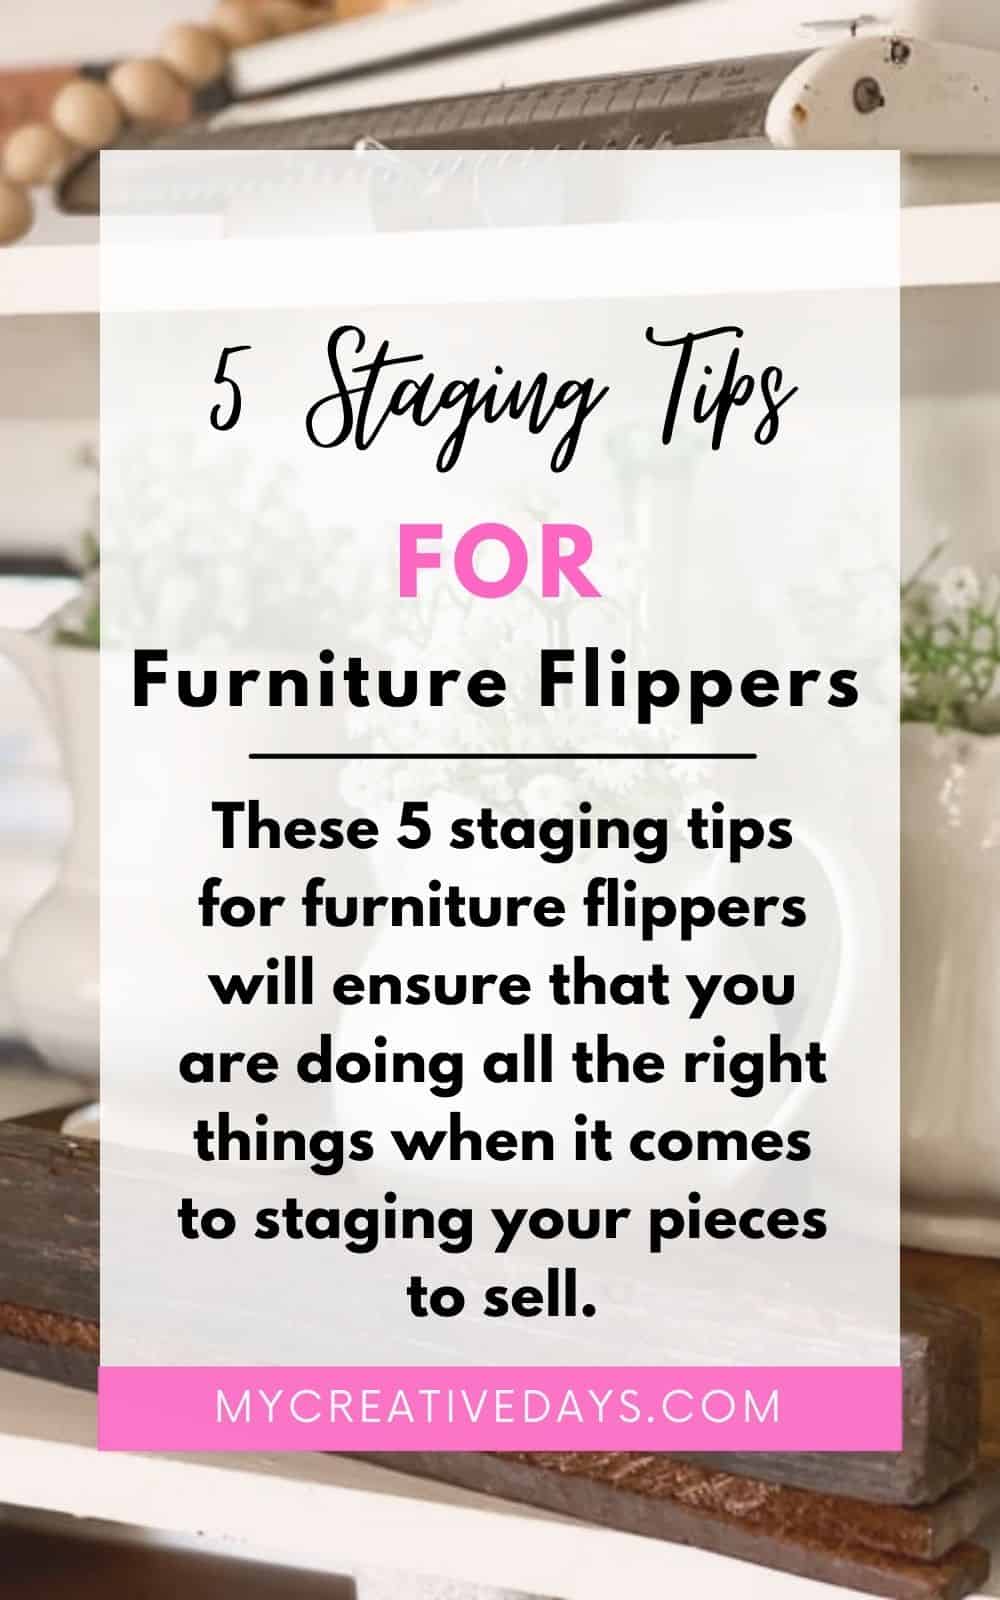 These 5 staging tips for furniture flippers will ensure that you are doing all the right things when it comes to staging your pieces to sell.